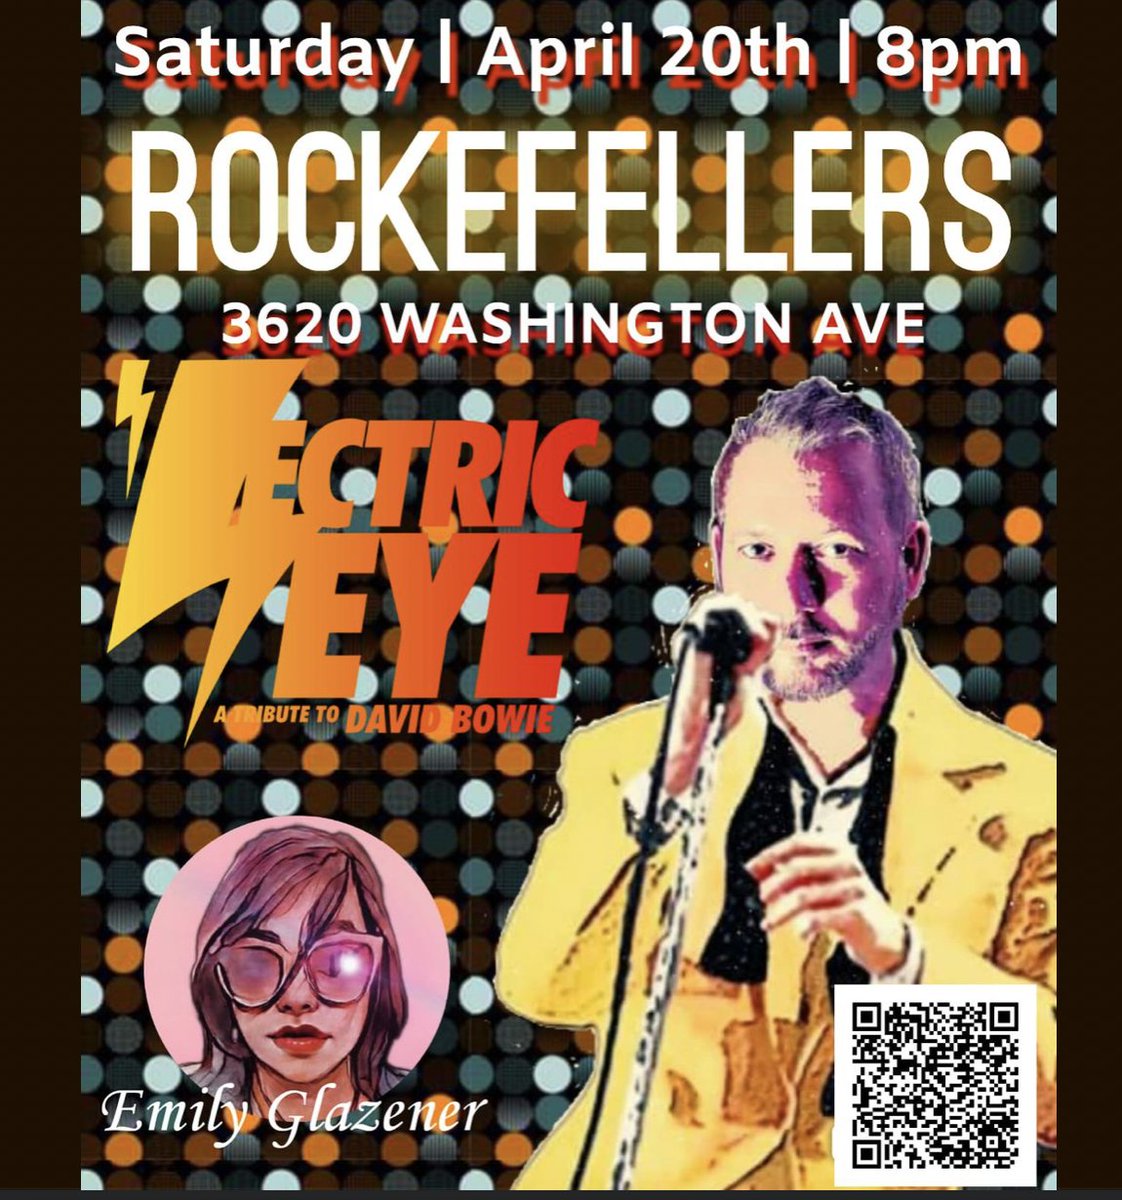 Hey #Houston !! Come celebrate 4/20 with us at Rockefellers Houston with the Music of #DavidBowie featuring Tribute Artists 'Lectric Eye ! Limited Reserved seating ON SALE NOW at EVENTBRITE . #420 @rockefellershou #Bowie #livemusic #concert #tickets #eventbrite